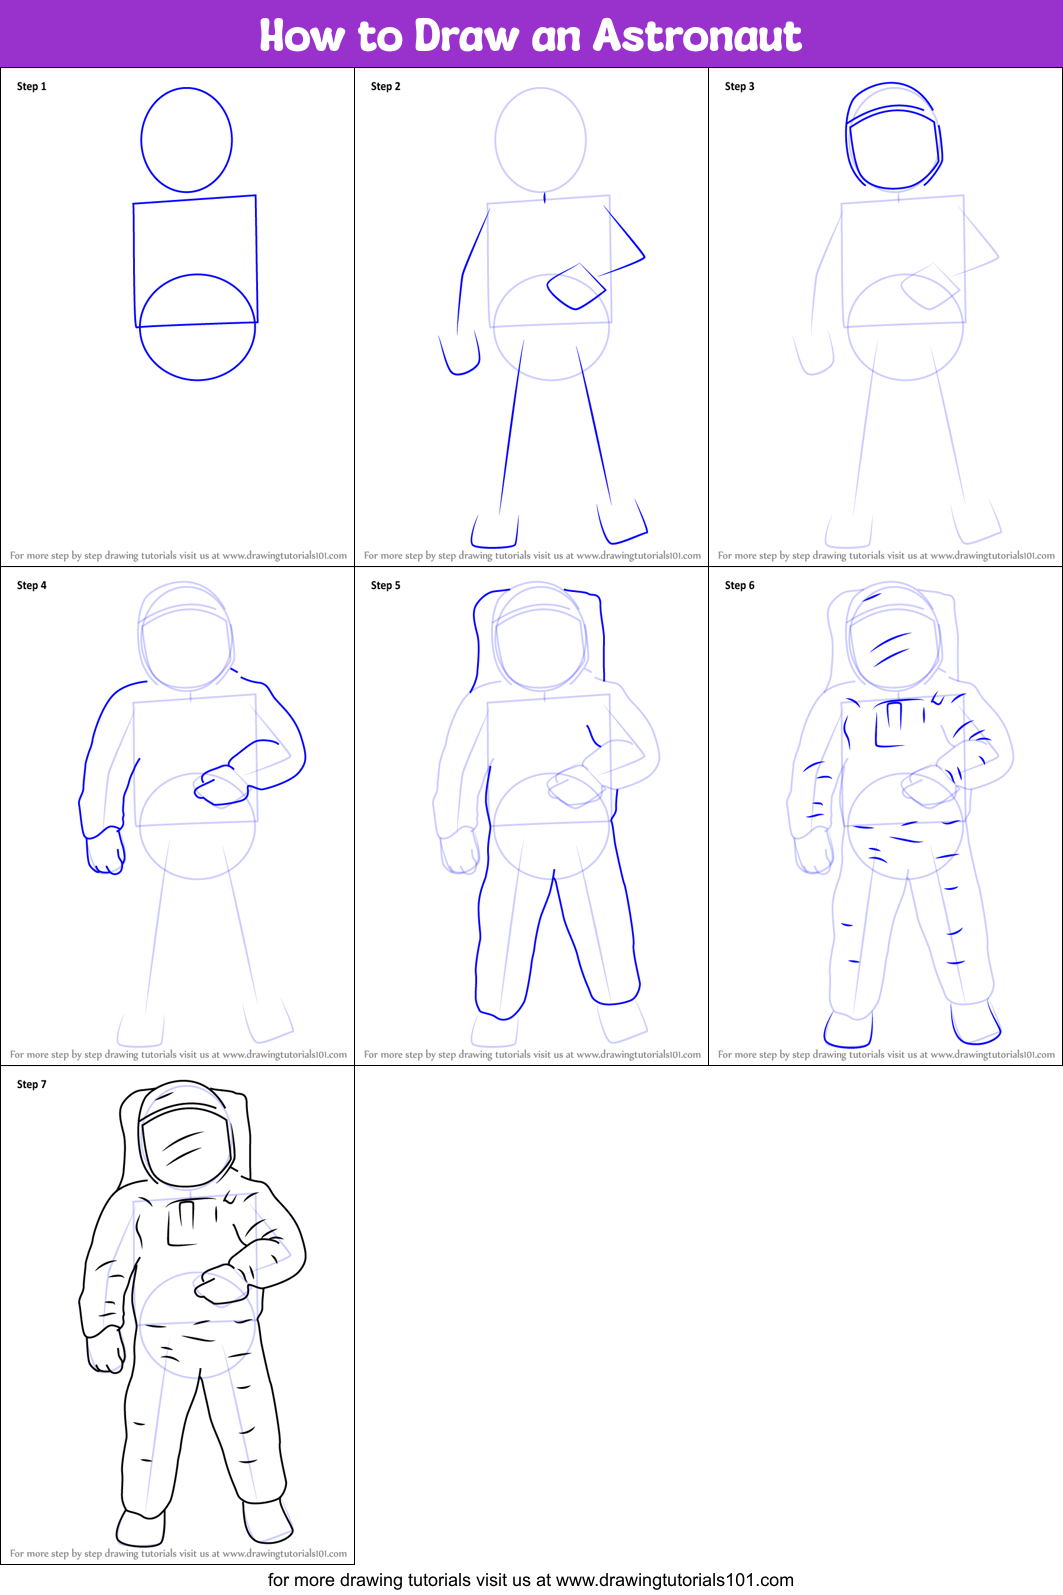 Amazing How To Draw An Astronaut Step By Step of the decade Learn more here 